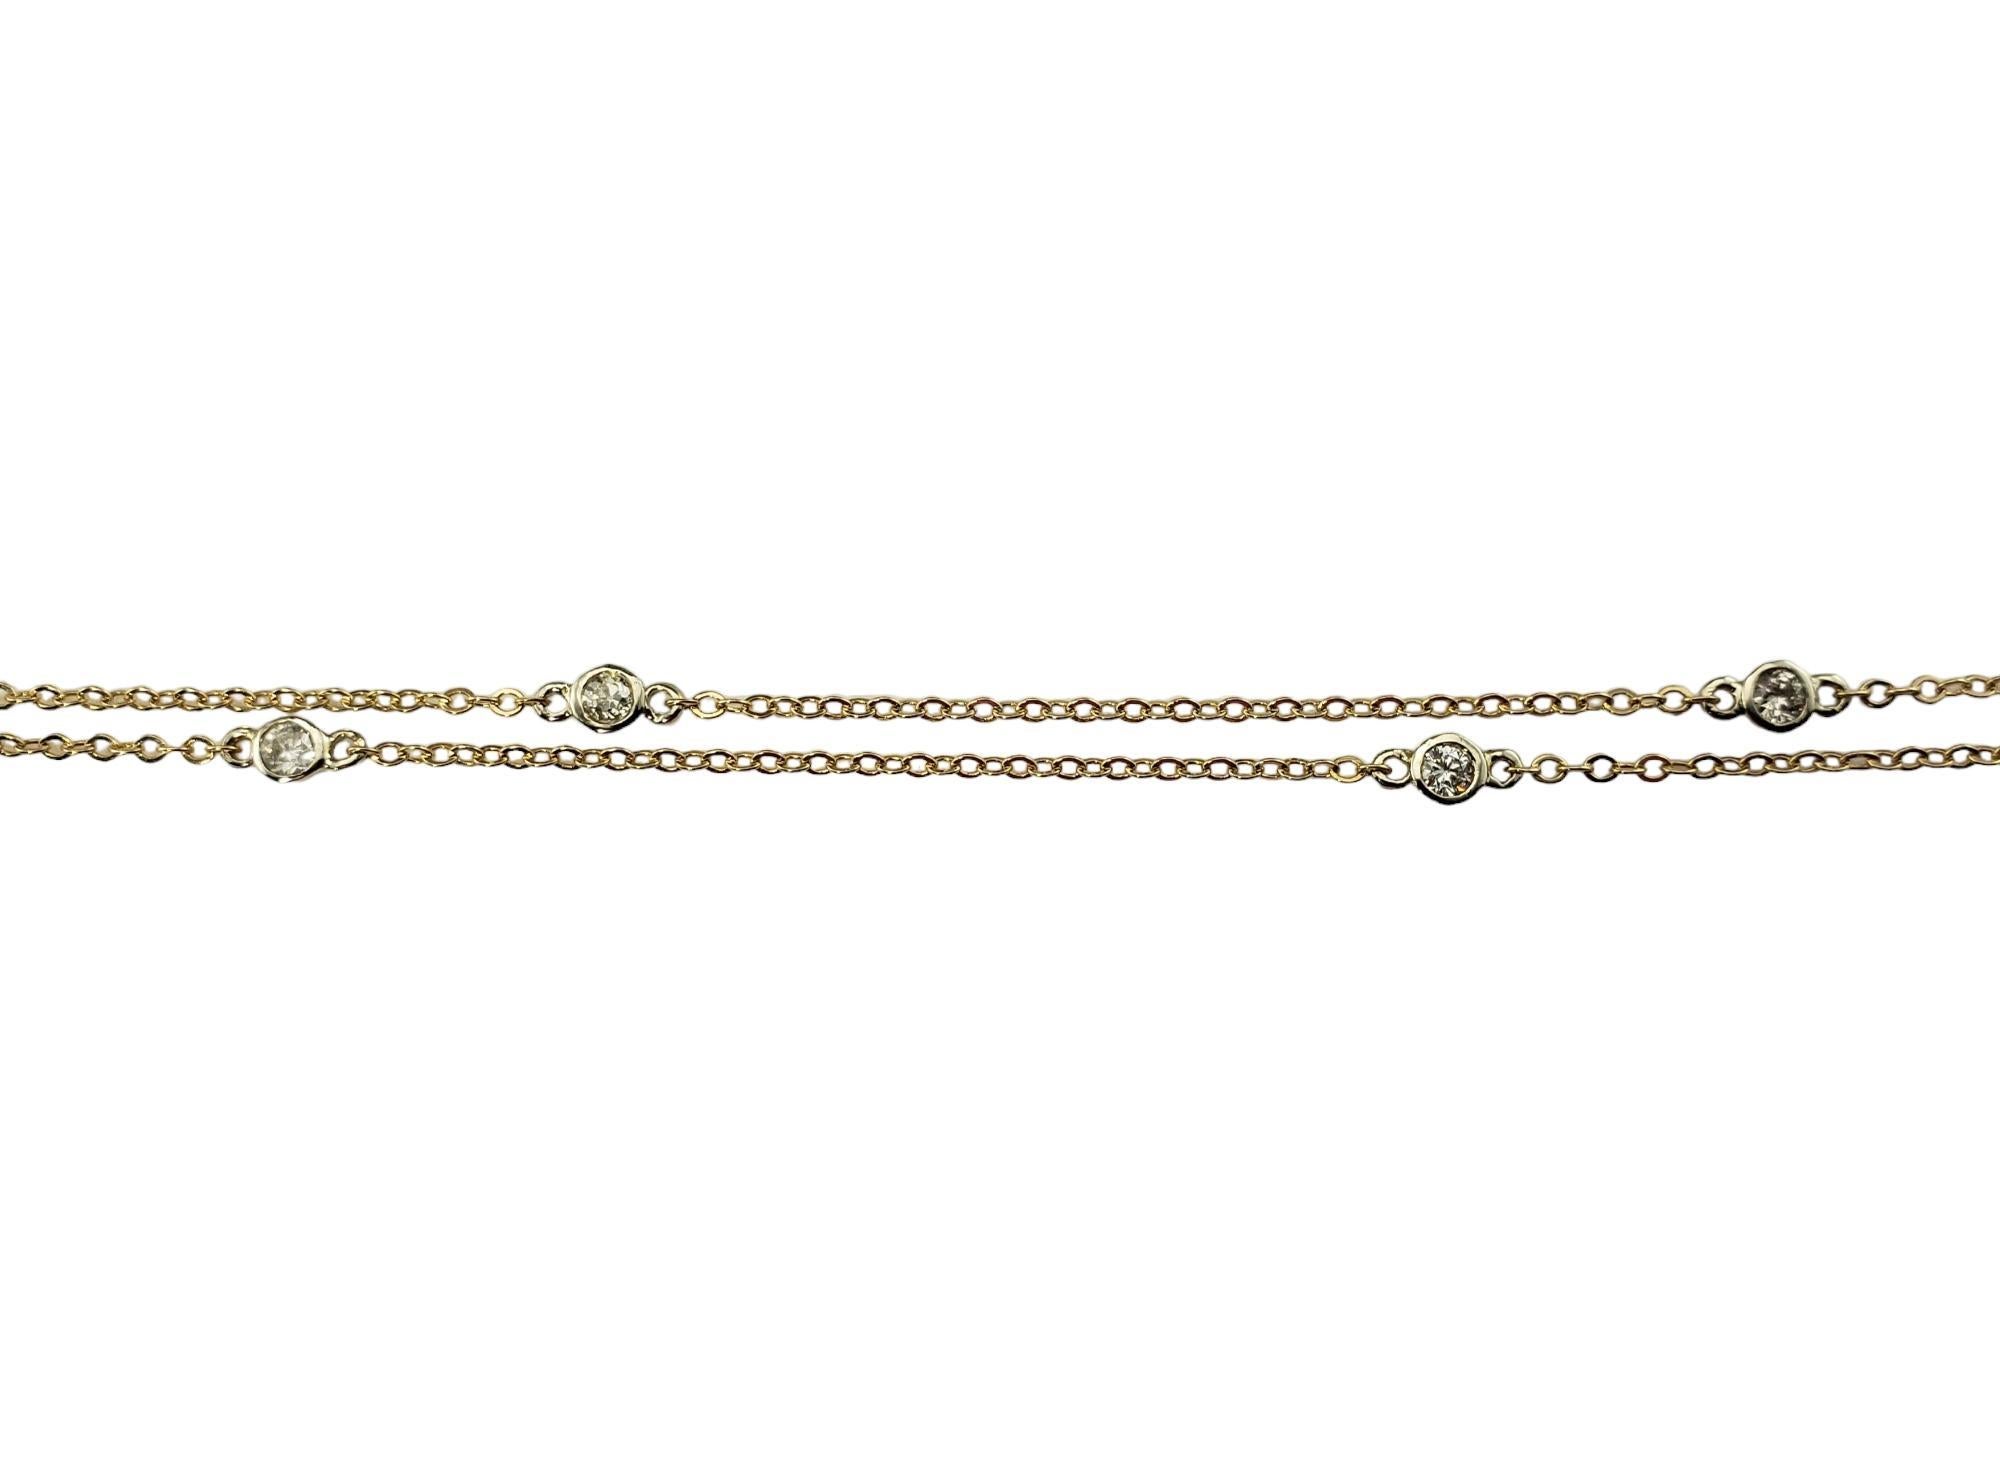 Vintage 14 Karat Yellow Gold and Diamond Station Necklace-

This elegant station necklace features five round brilliant cut diamonds set in classic 14K yellow gold.

Approximate total diamond weight: .35 ct.

Diamond clarity: SI1-I1

Diamond color: 